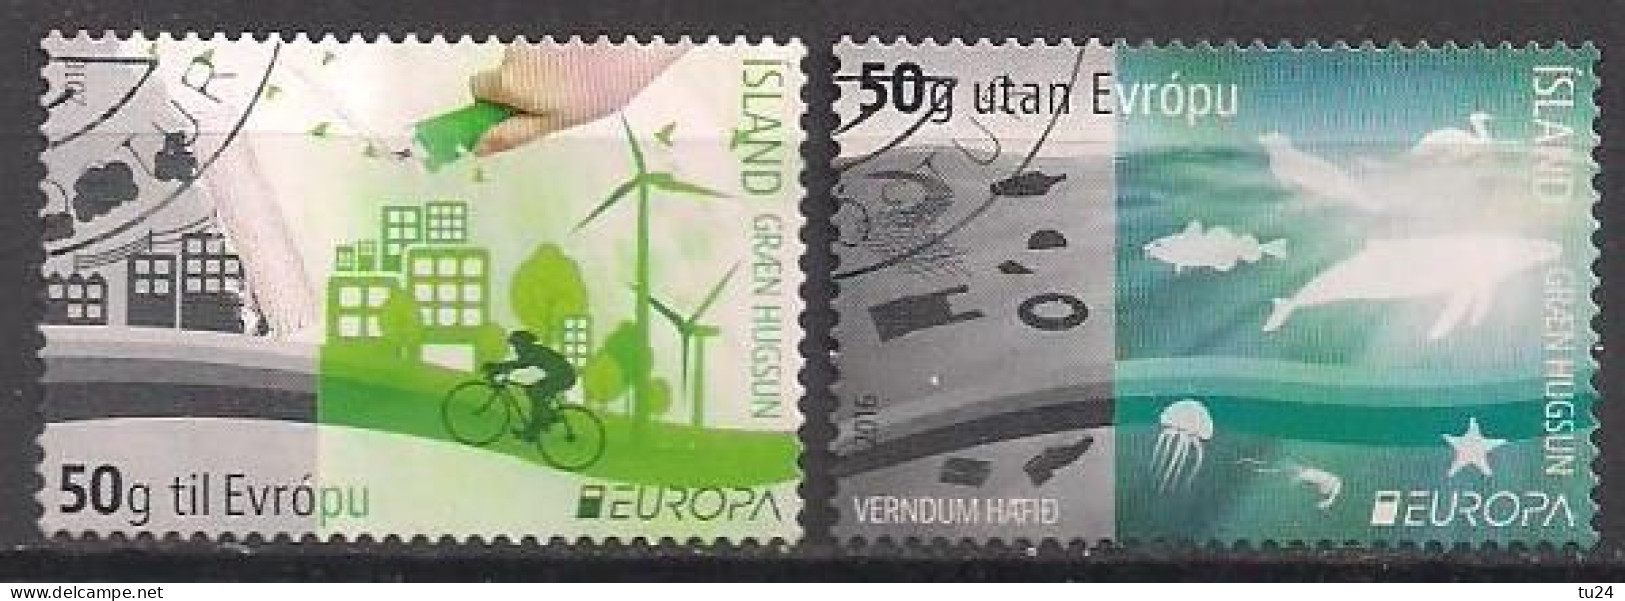 Island  (2016)  Mi.Nr.  1495 + 1496  Gest. / Used  (4he06)  EUROPA / MH / From Booklet - Usados